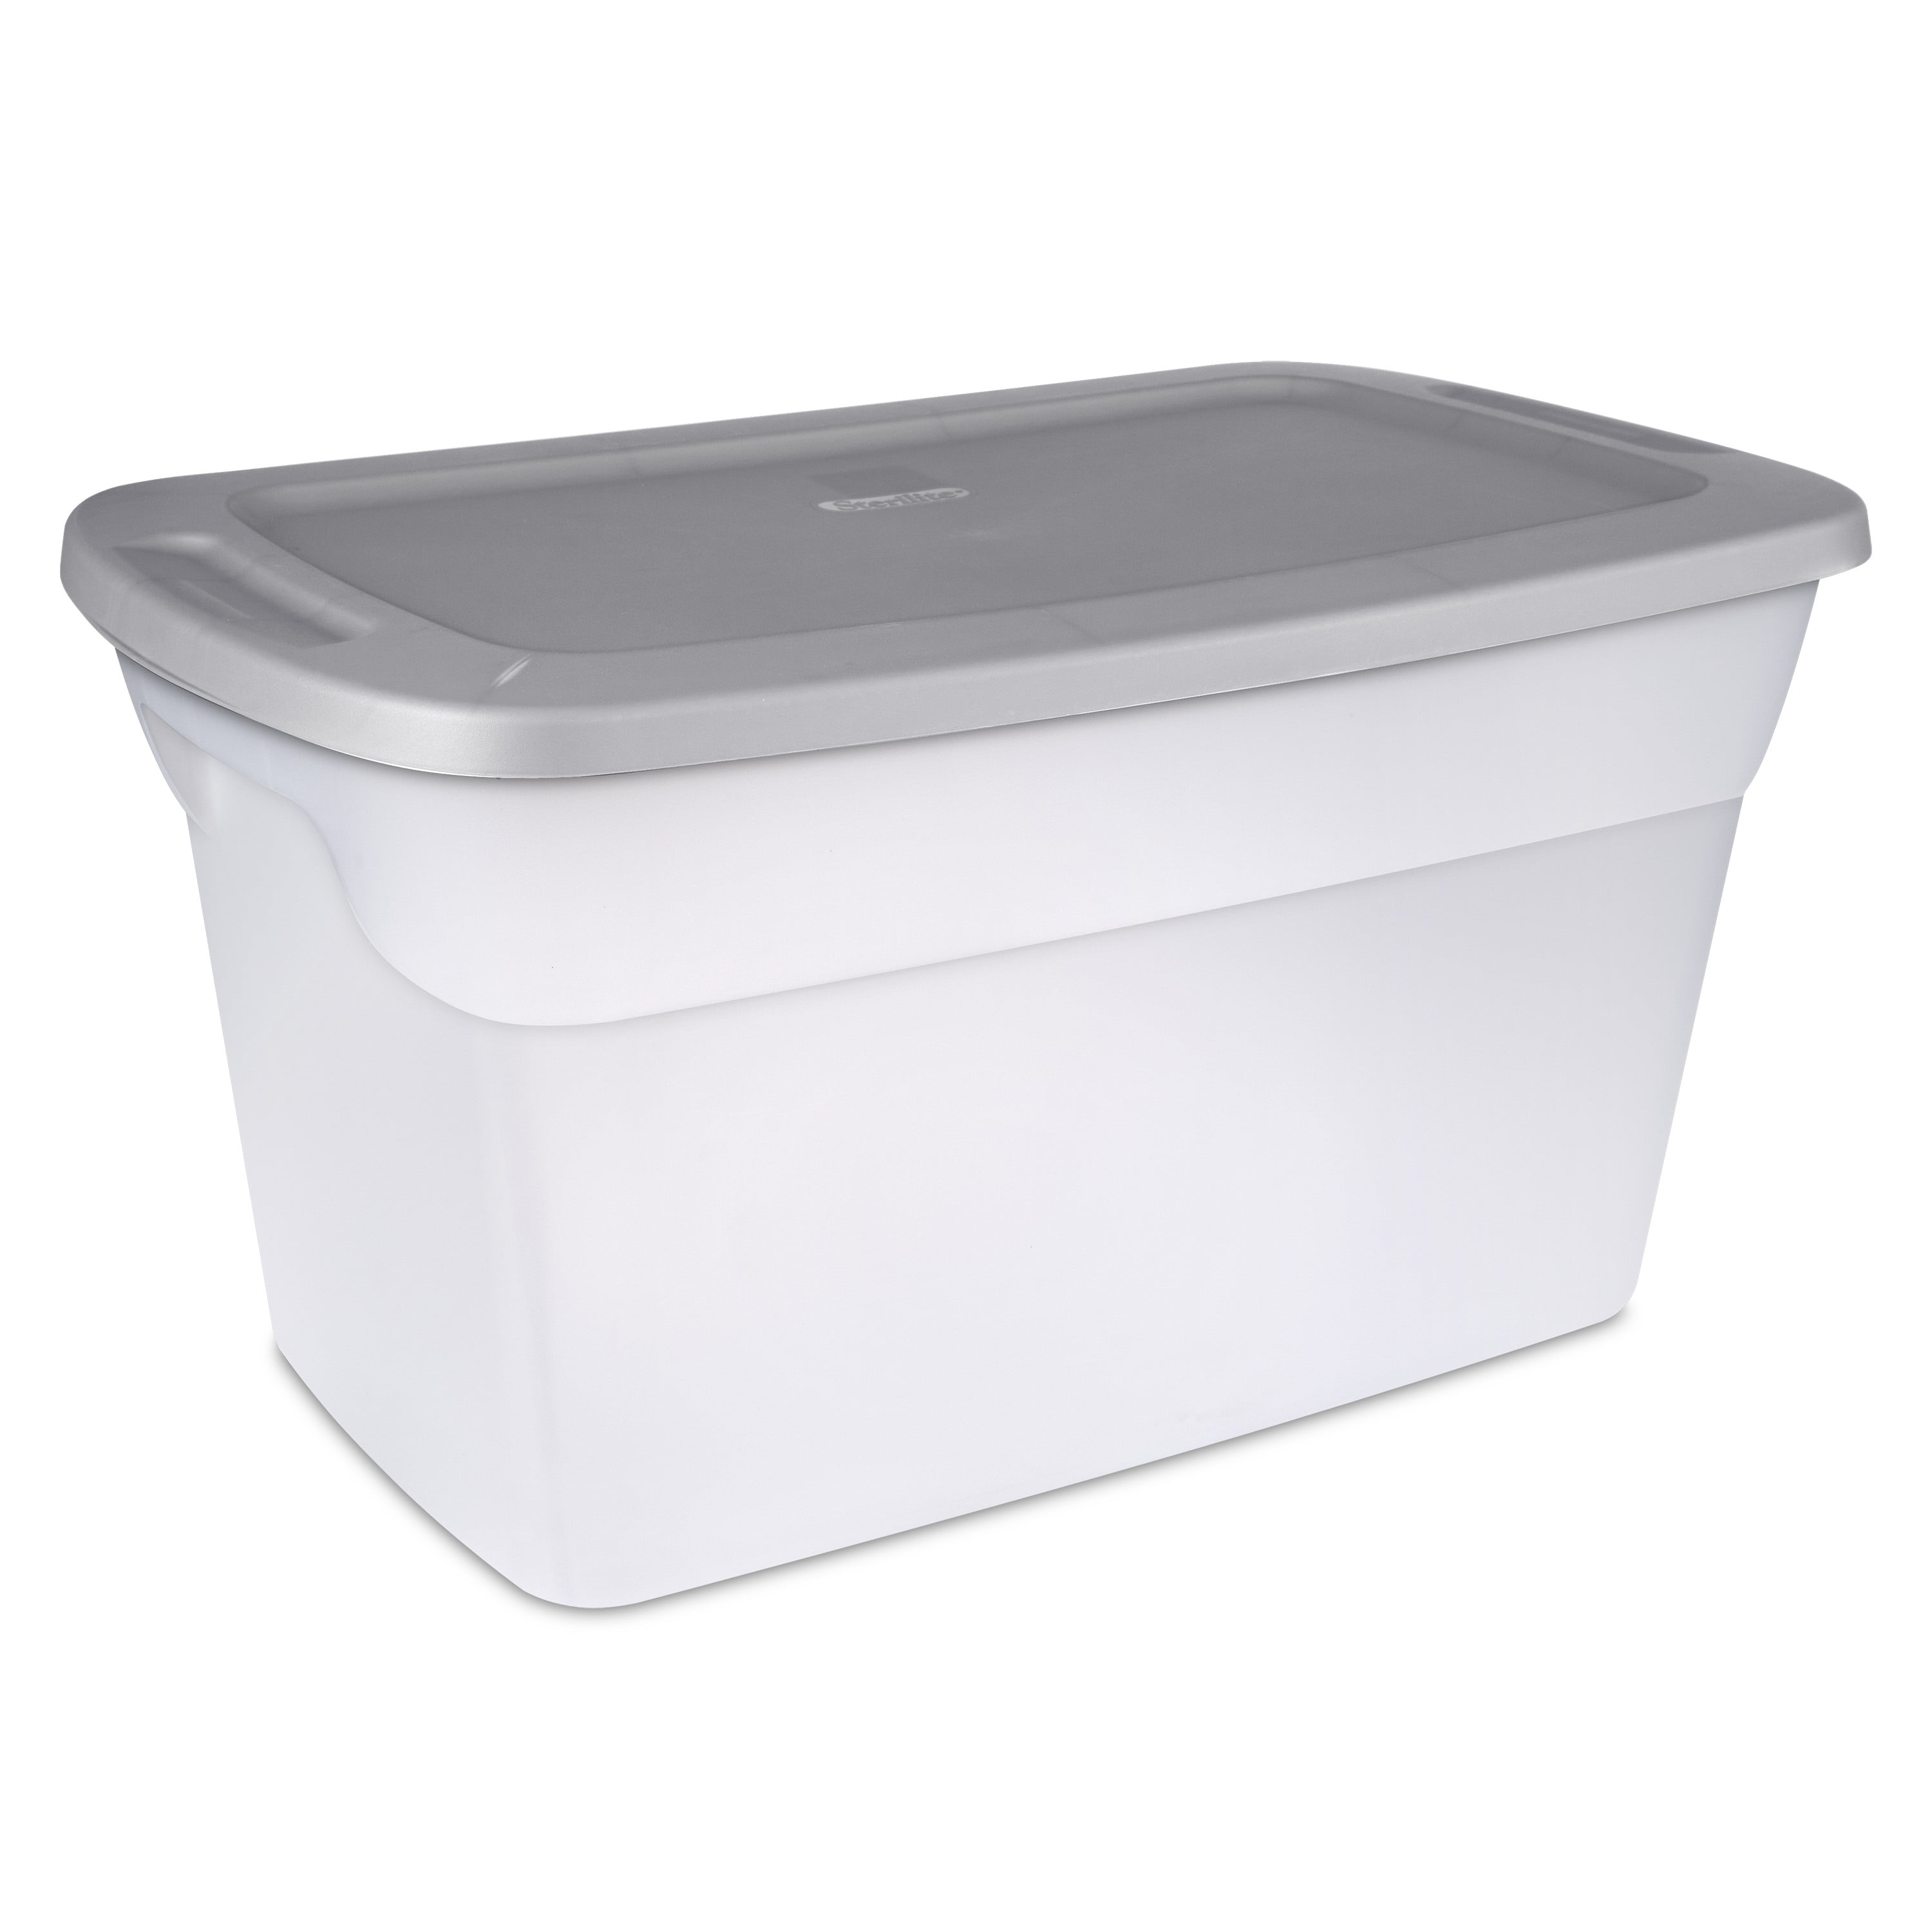 Waikhomes Set of 4 Large Plastic Storage Box with Lid, 30 L Latching  Storage Box Bin, Clear